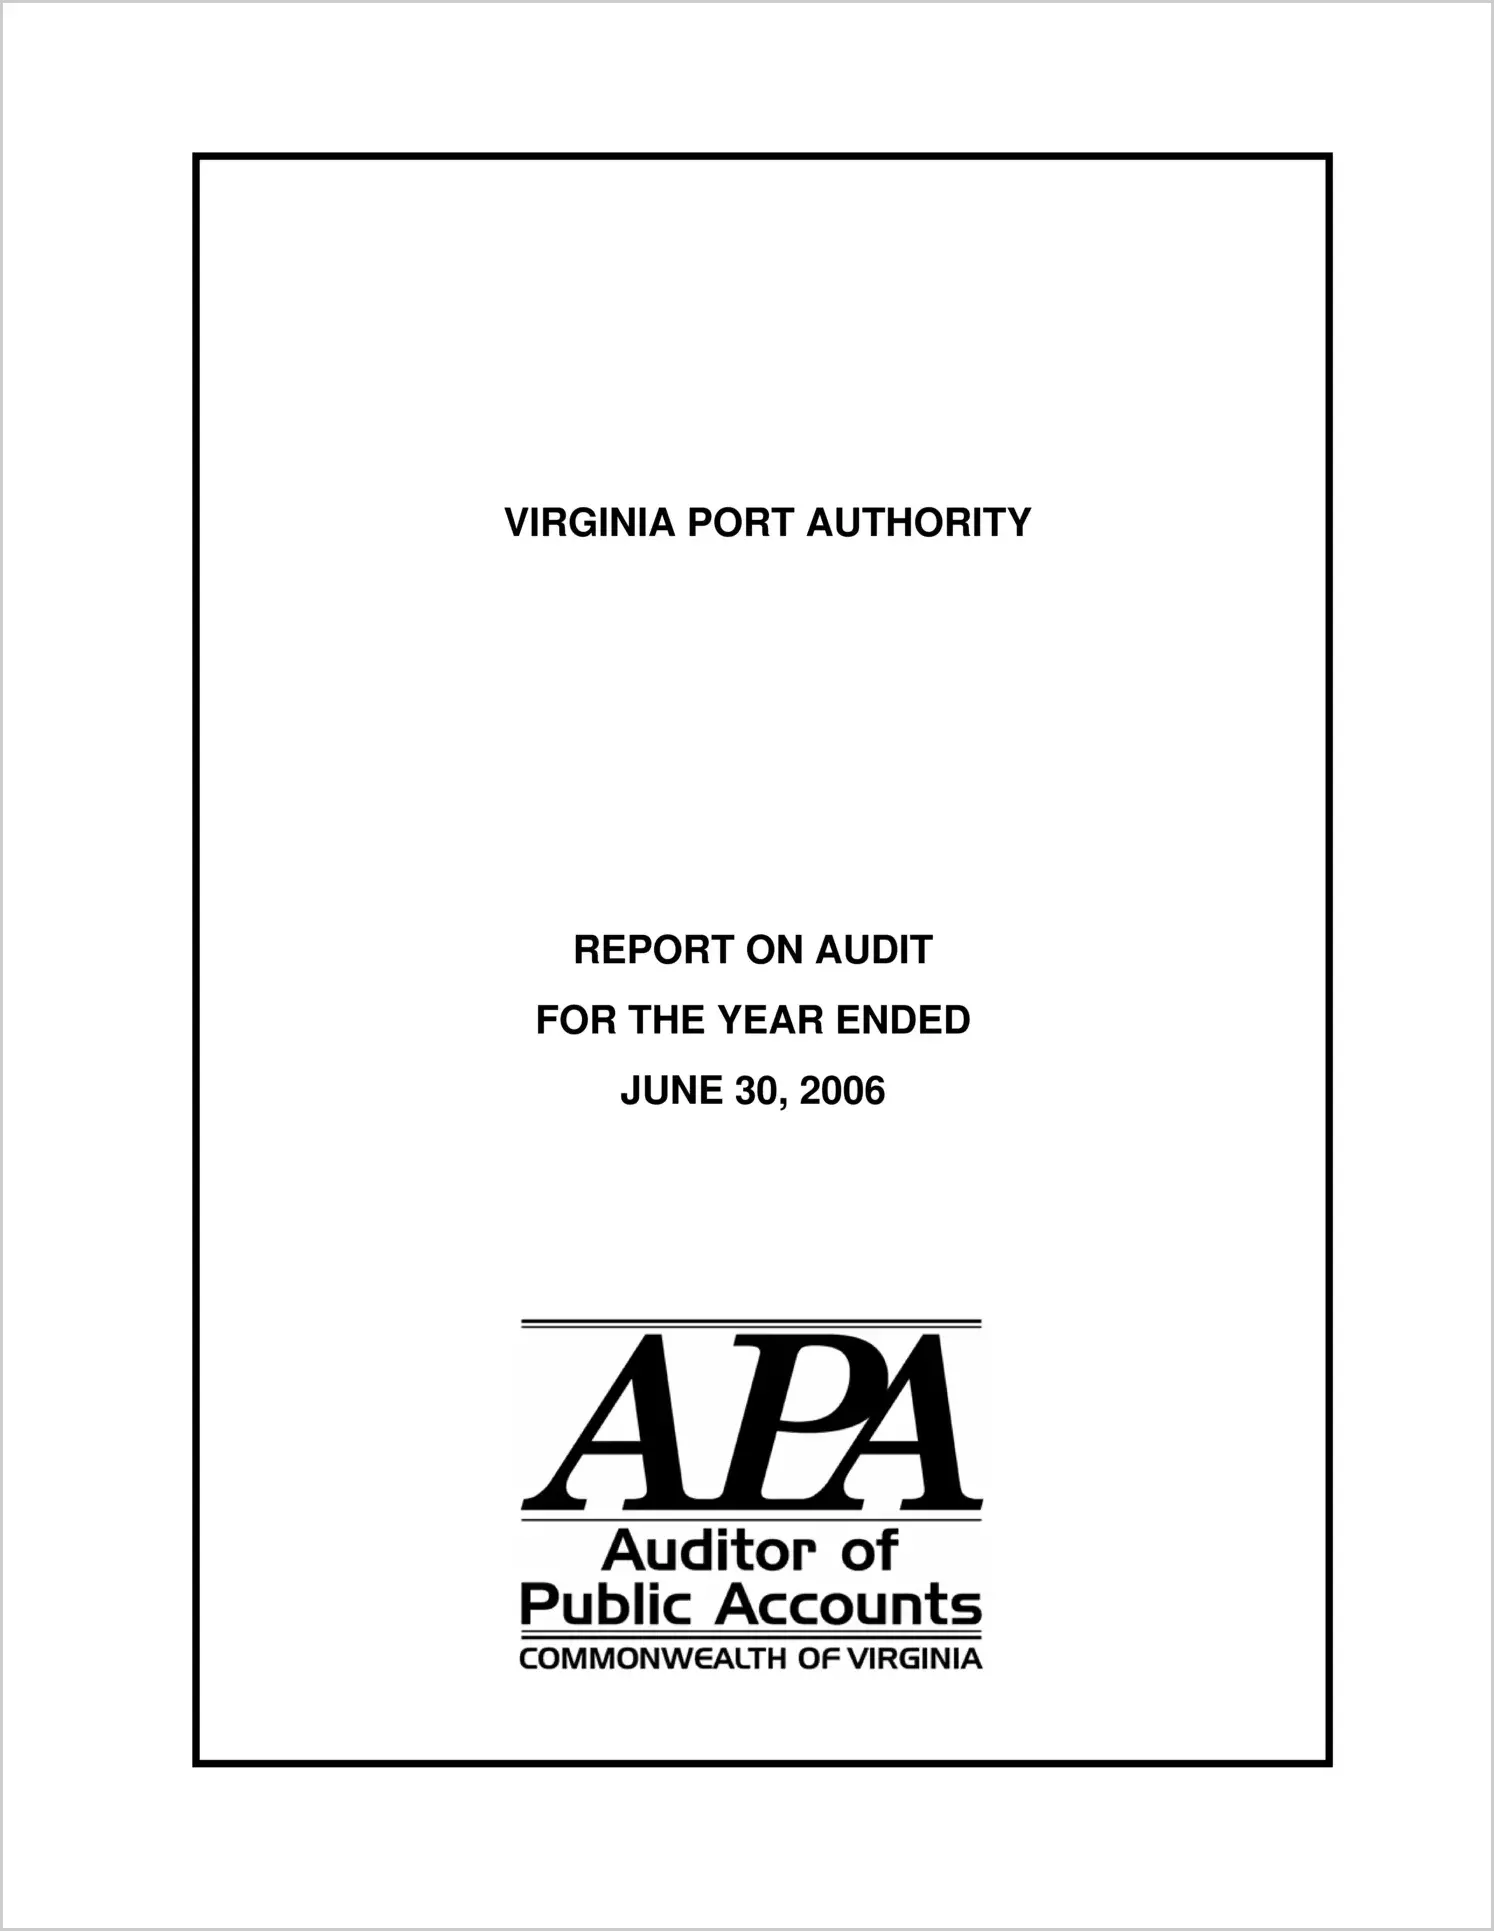 Virginia Port Authority for the year ended June 30, 2006